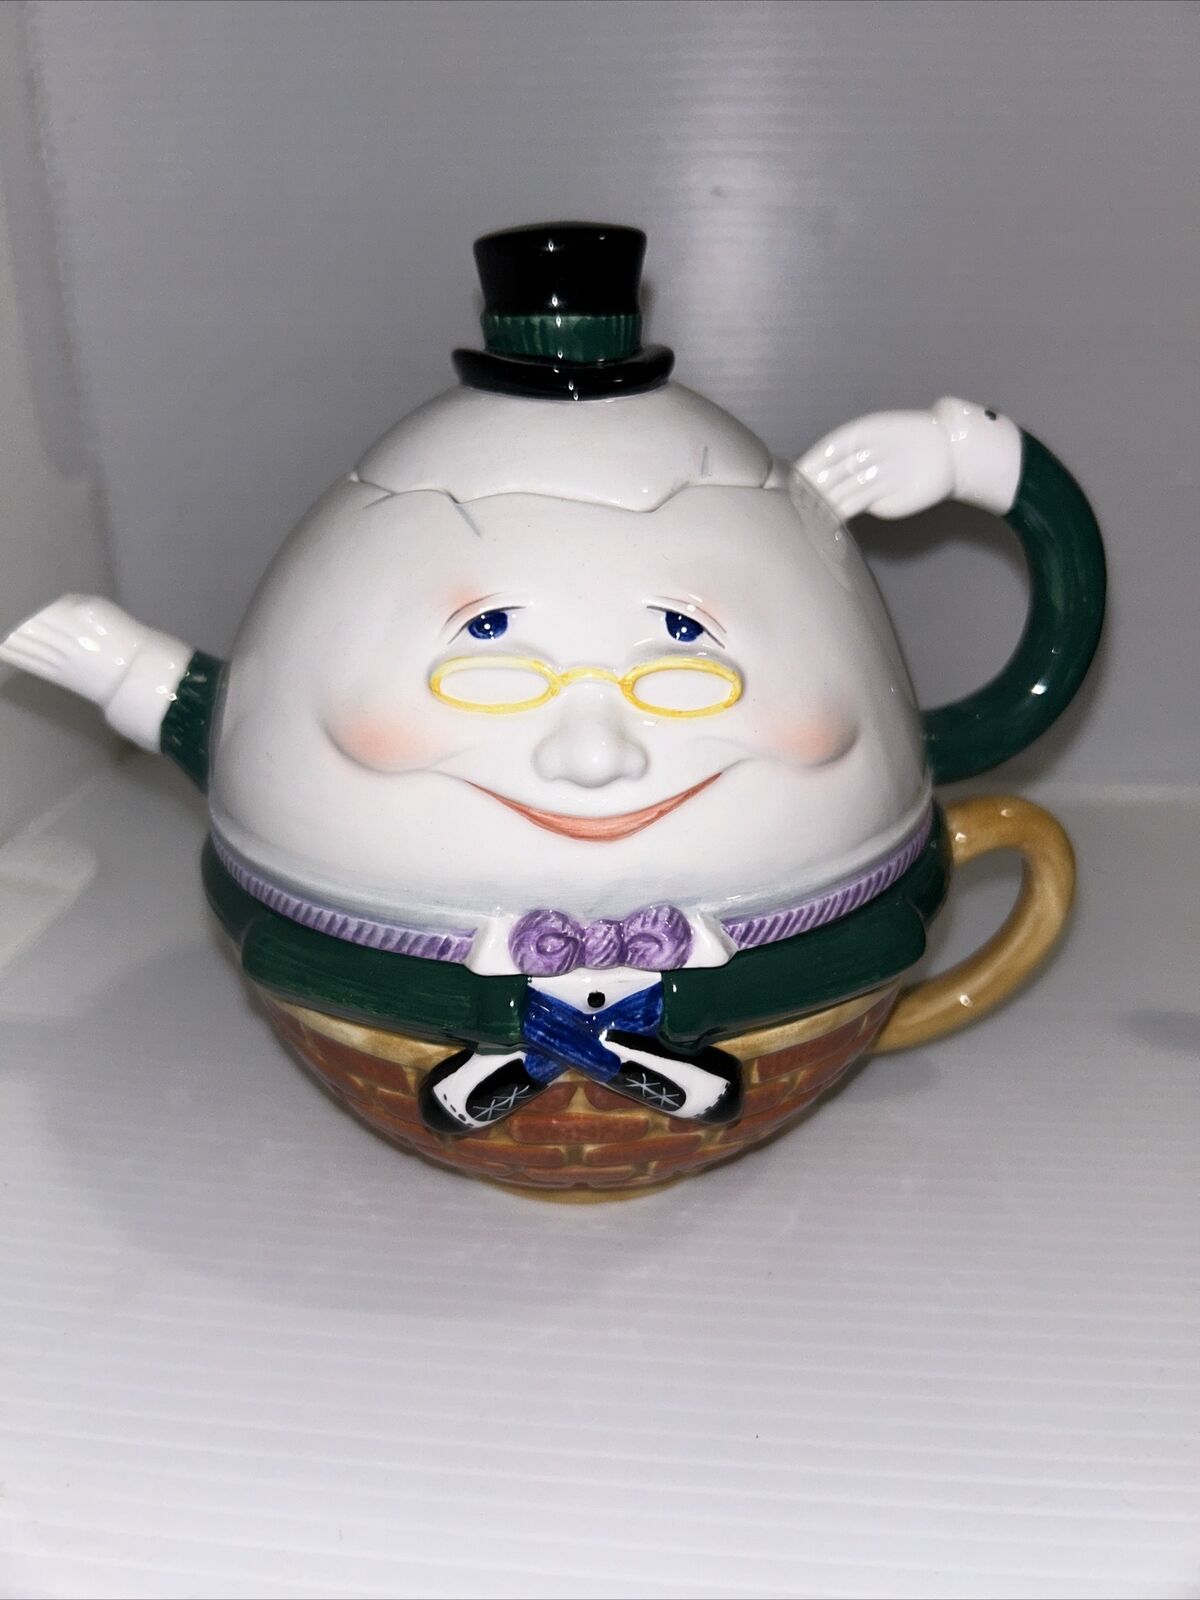 Dept 56 Humpty Dumpty Egg Teapot With Cup Storybook Nursery Rhyme - 5” High